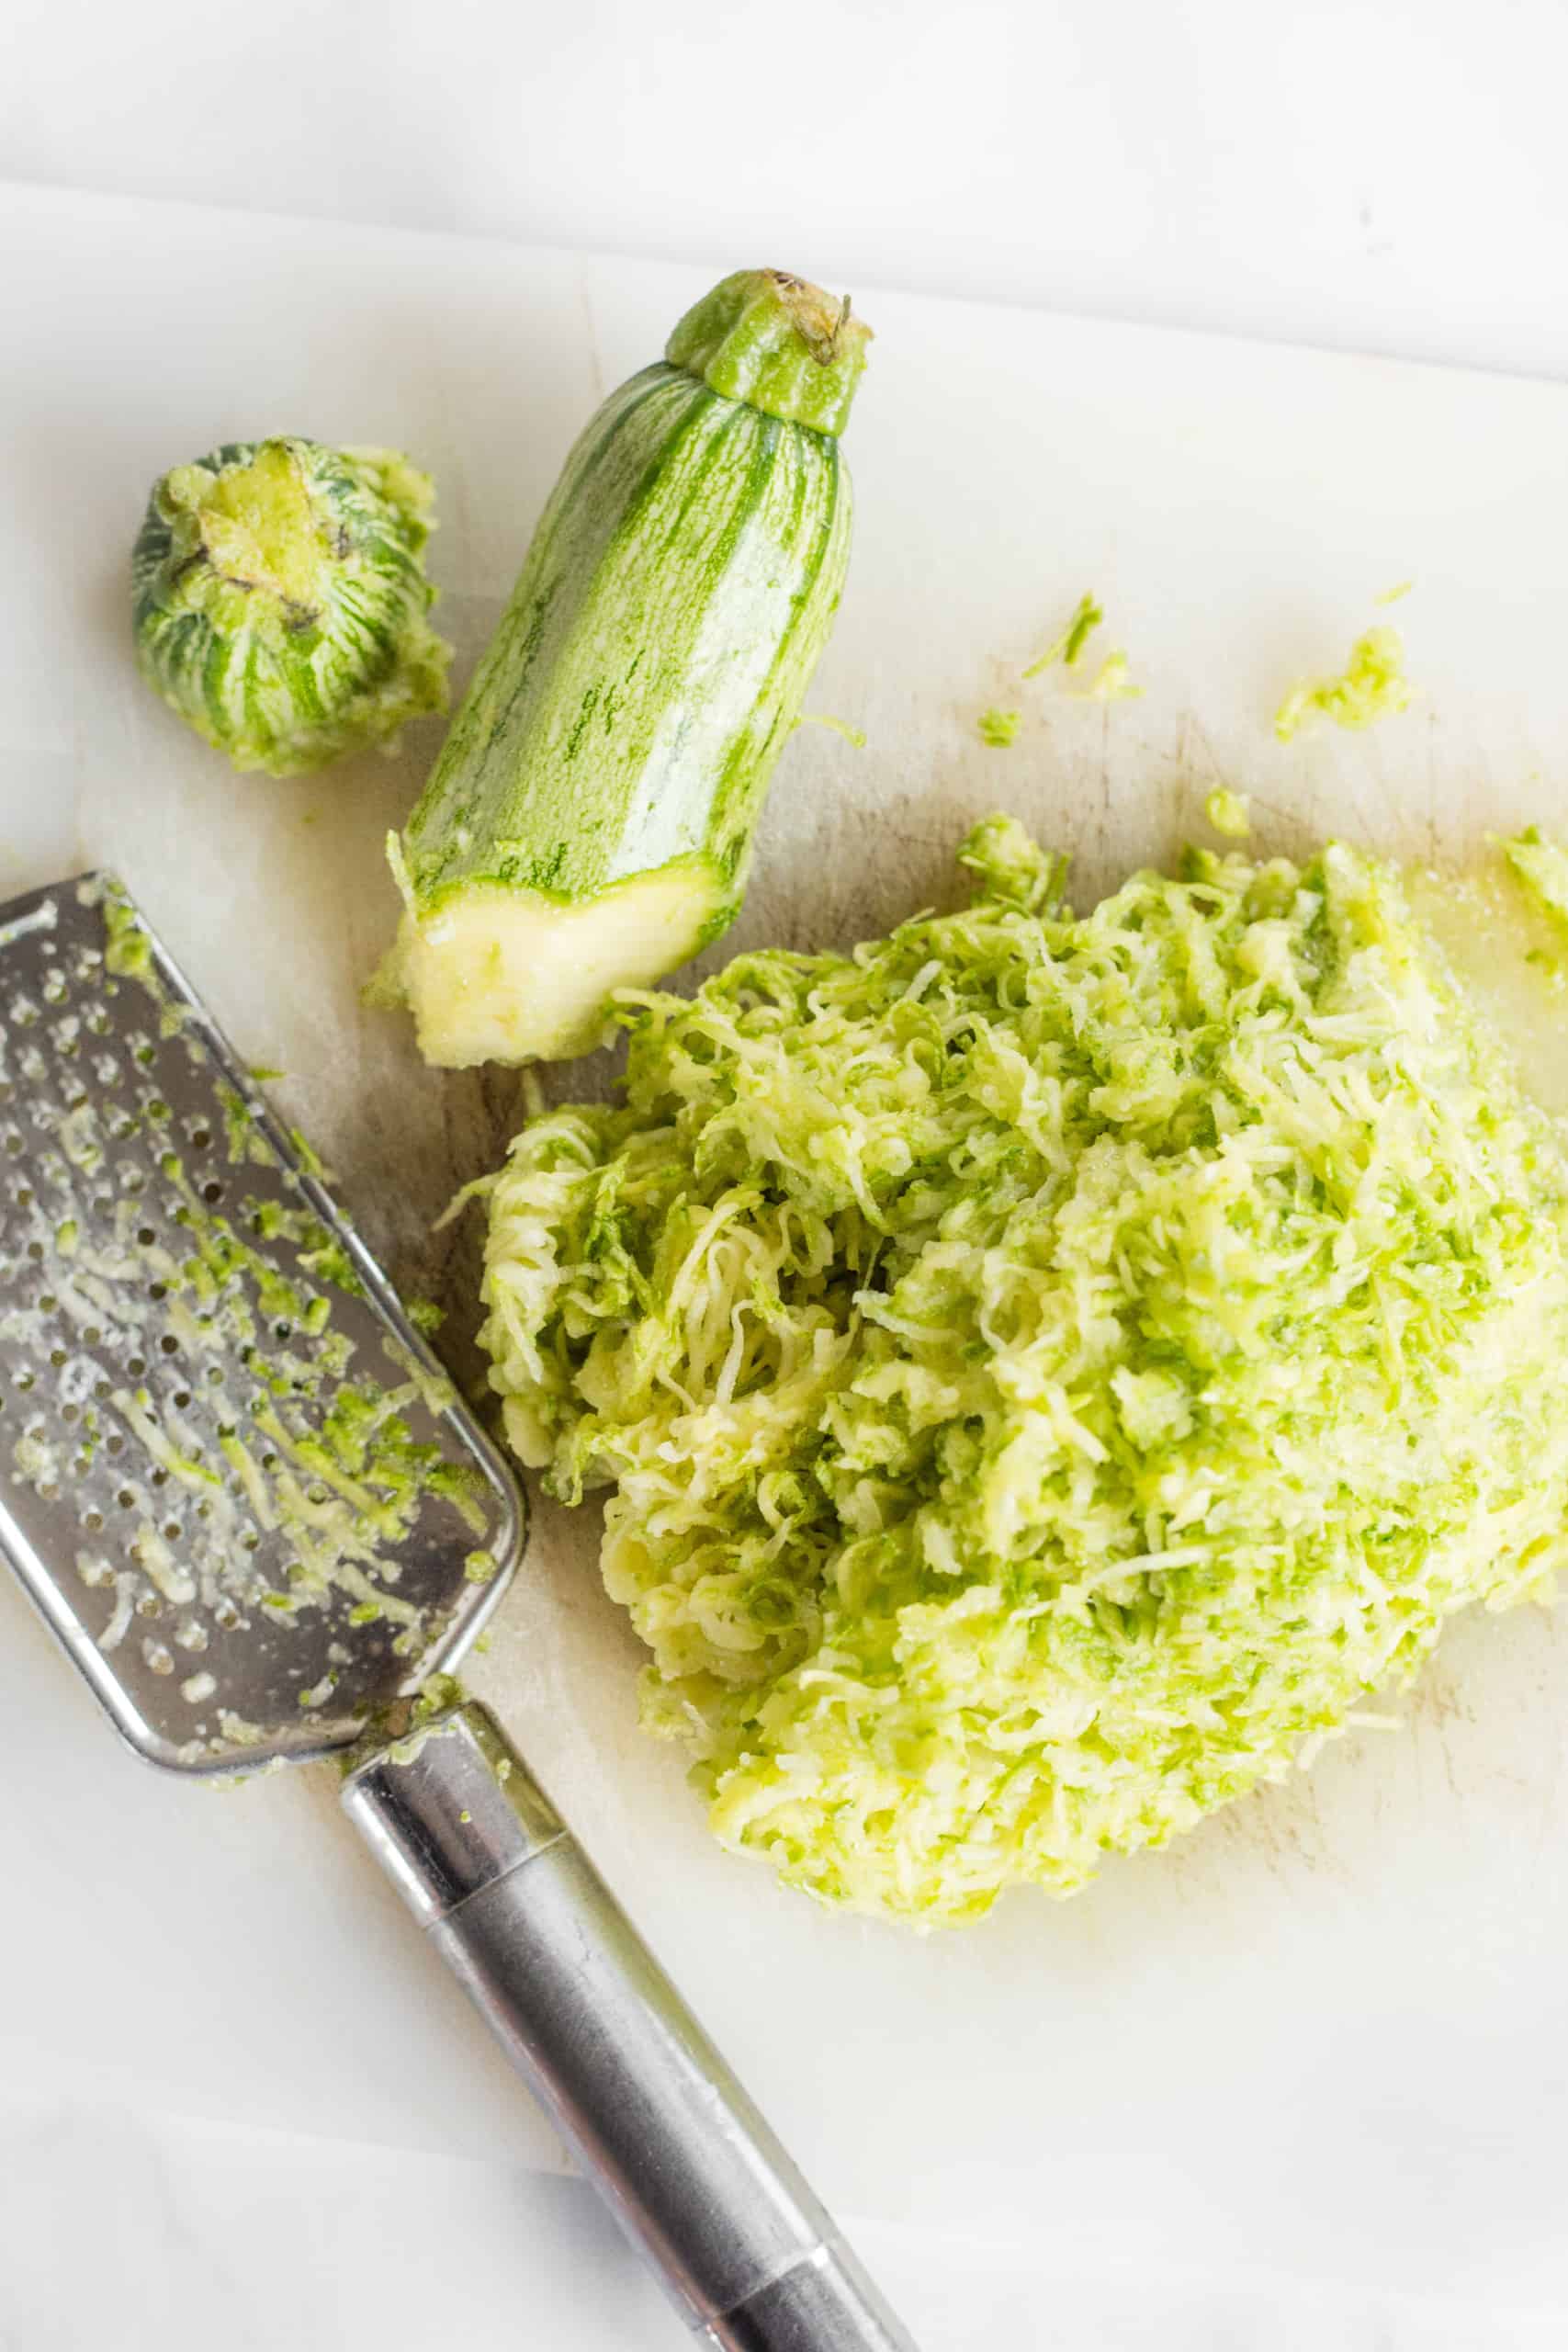 Grated zucchini and a cheese grater on a chopping board.